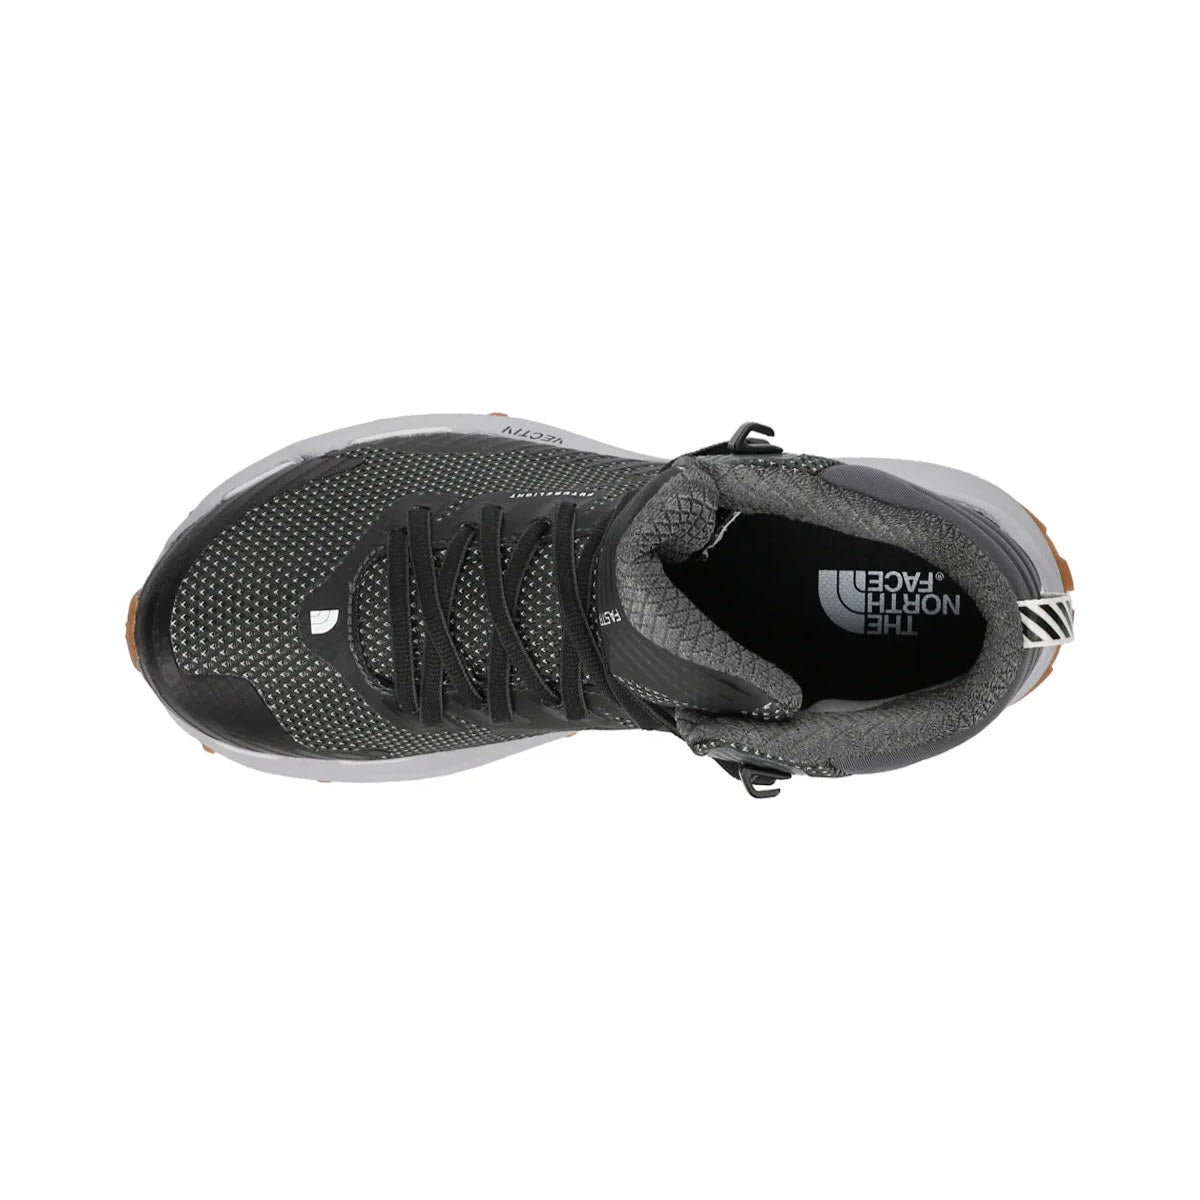 Top view of a single North Face VECTIV FASTPACK MID FUTURELIGHT ASPHALT - WOMENS trail running shoe with black laces and a rugged VECTIV technology sole.